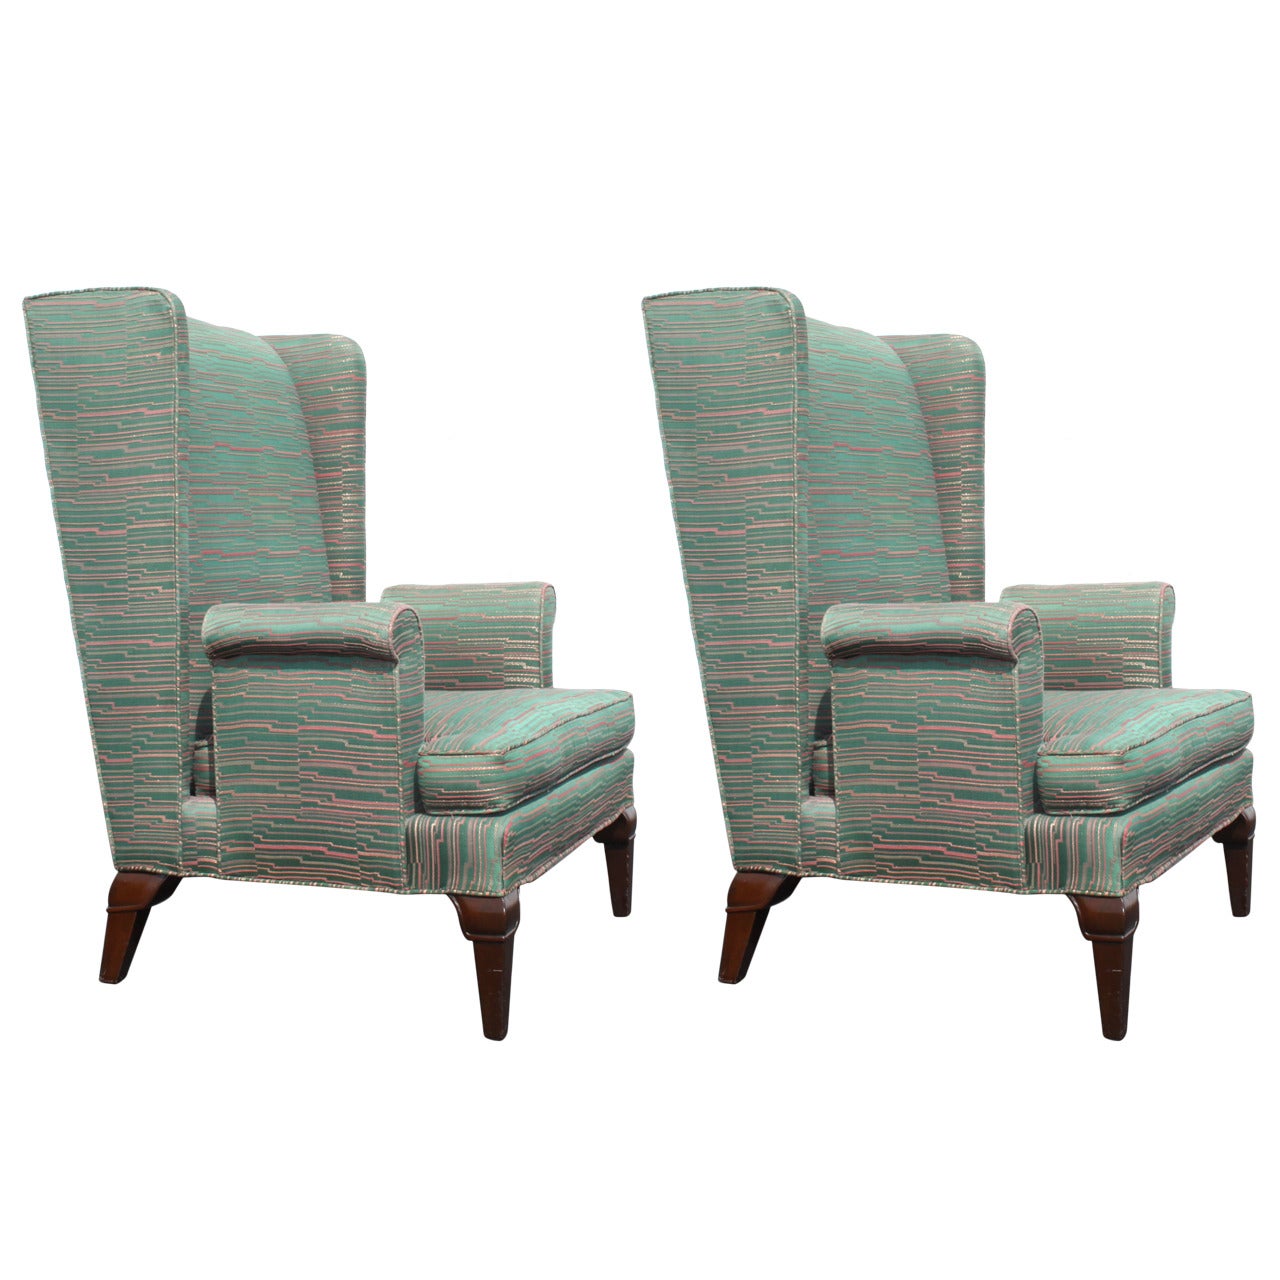 Pair of Tall Back Stylized Wingback Chairs Attributed to Grosfeld House For Sale